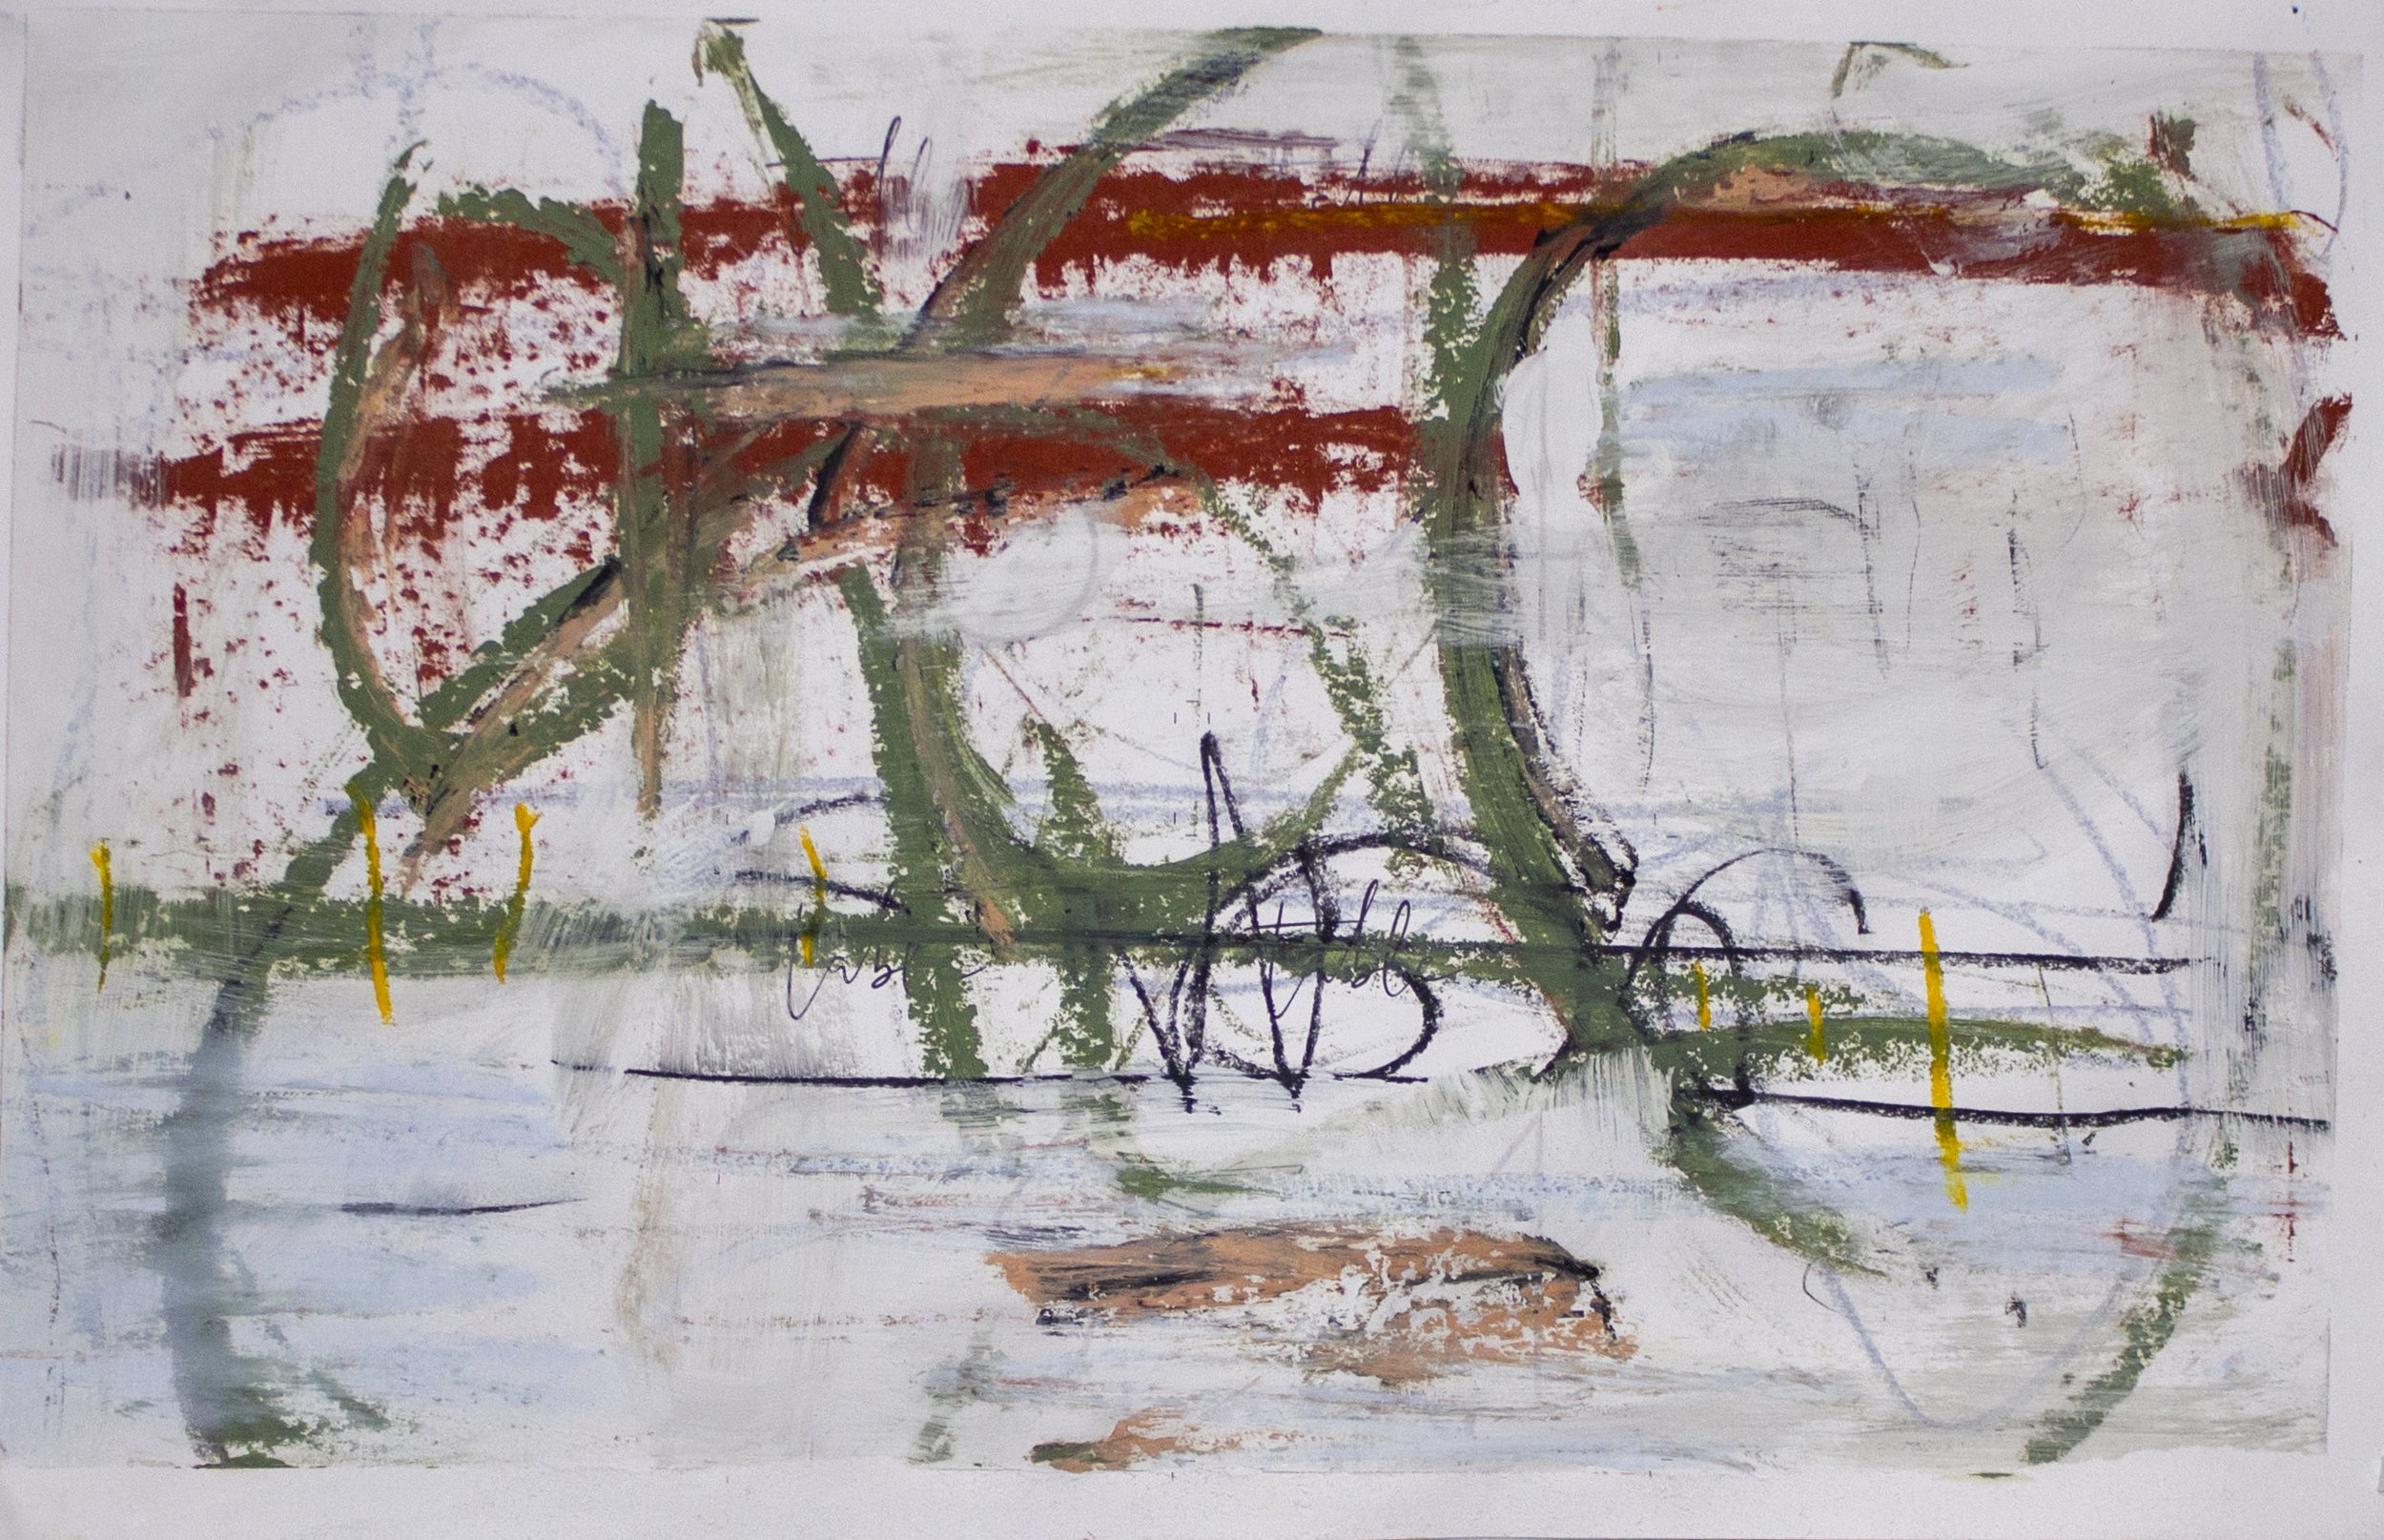   Considering The Current State of Affairs,  2021.  17 x 11 inches  Oil, Acrylic, Pastel, Crayon on Paper.  Private Collection 